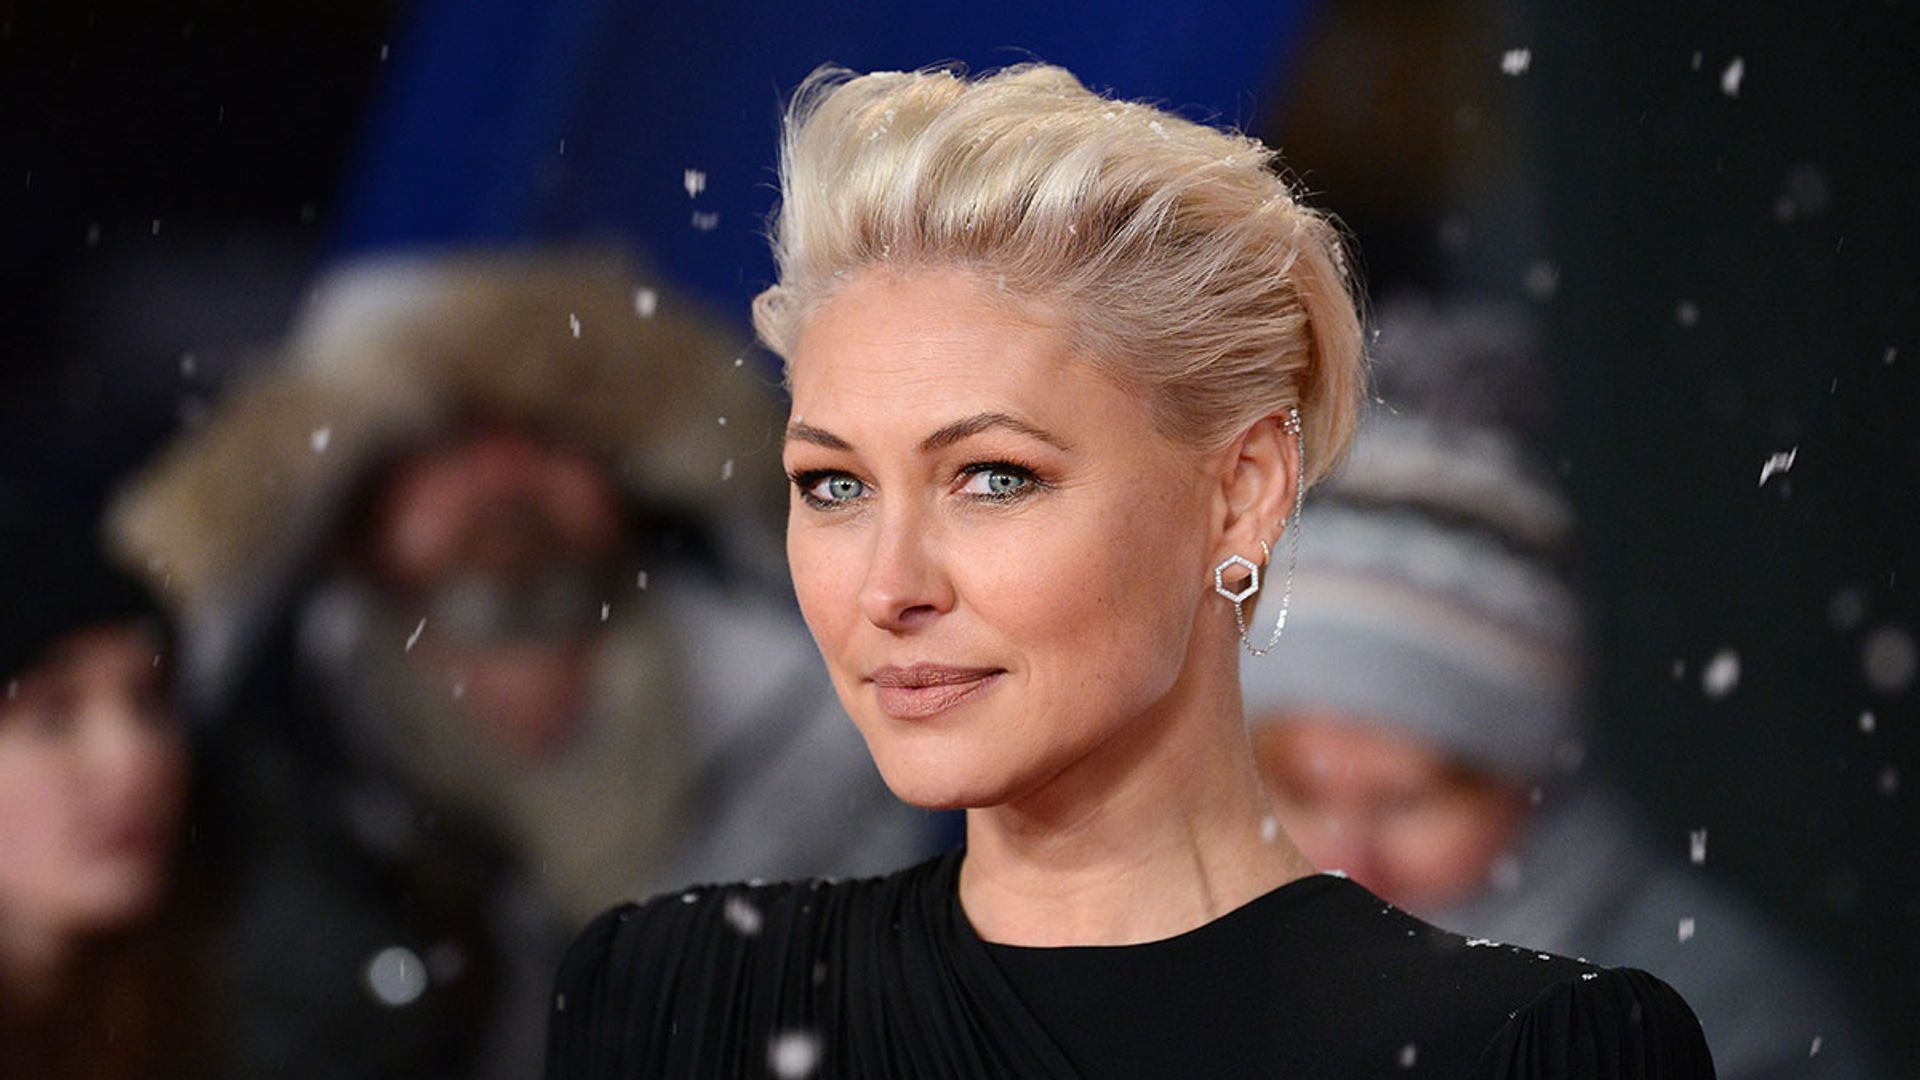 The Voice Host Emma Willis Has The Best Hair Her Stylist Reveals All The Secrets Hello